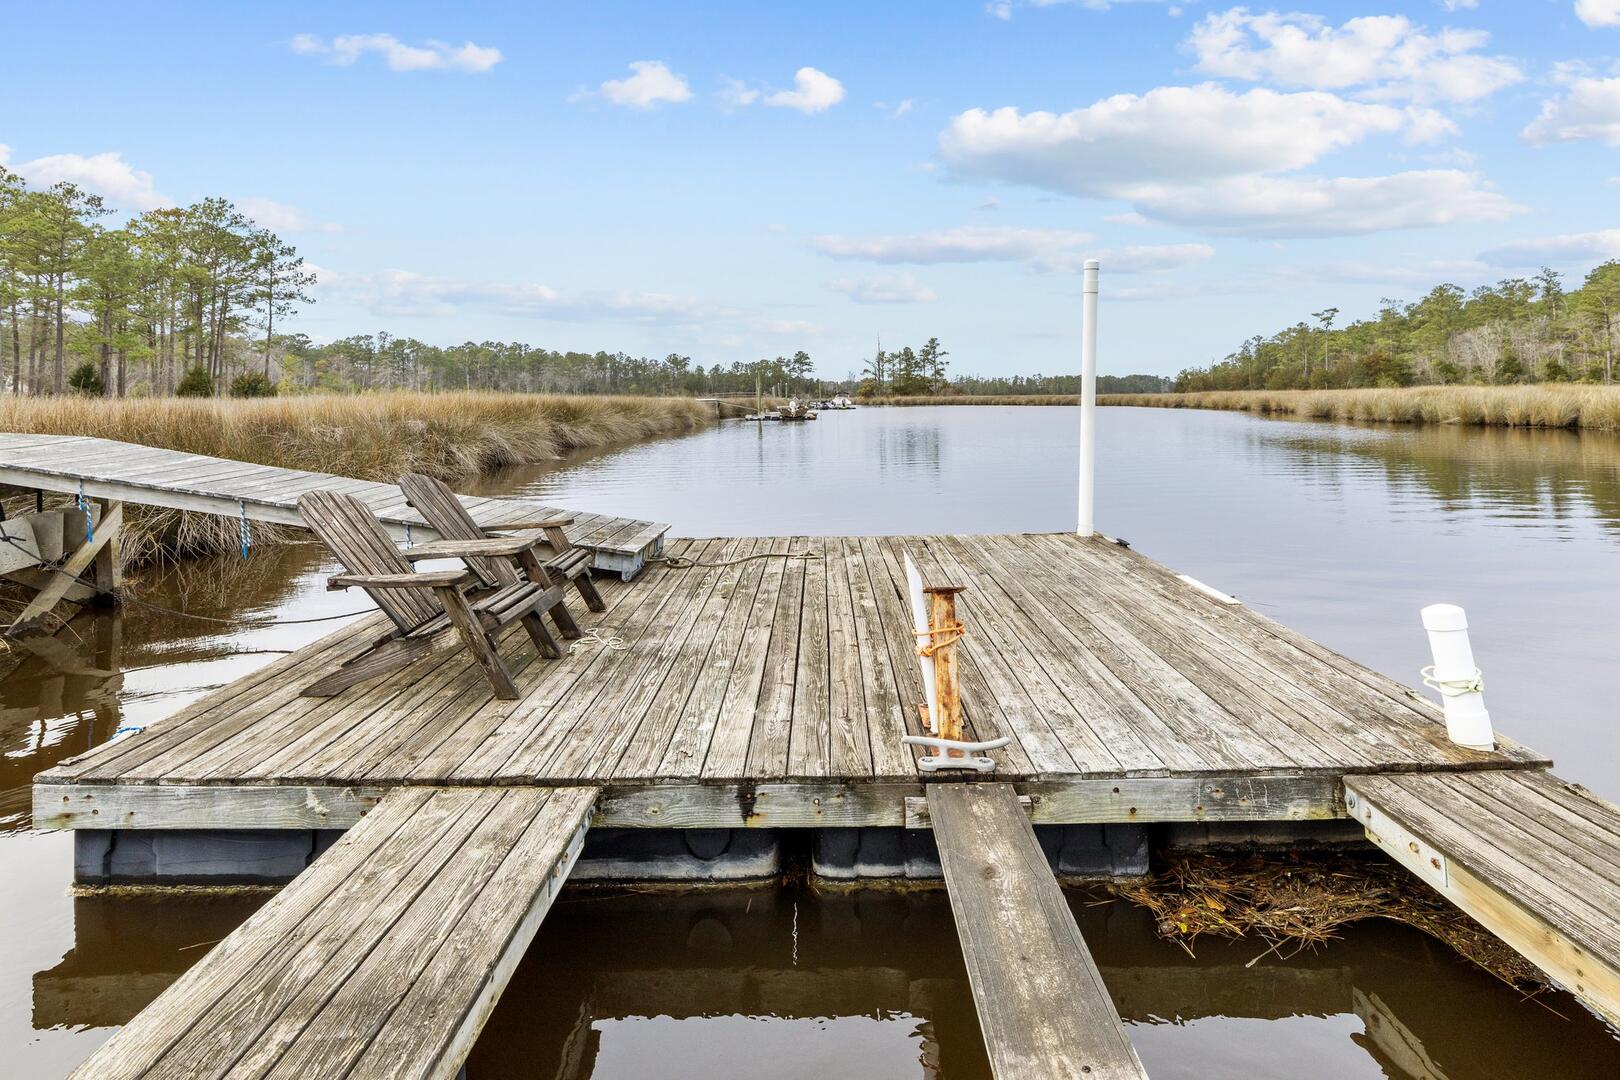 Dock for Sipping Coffee